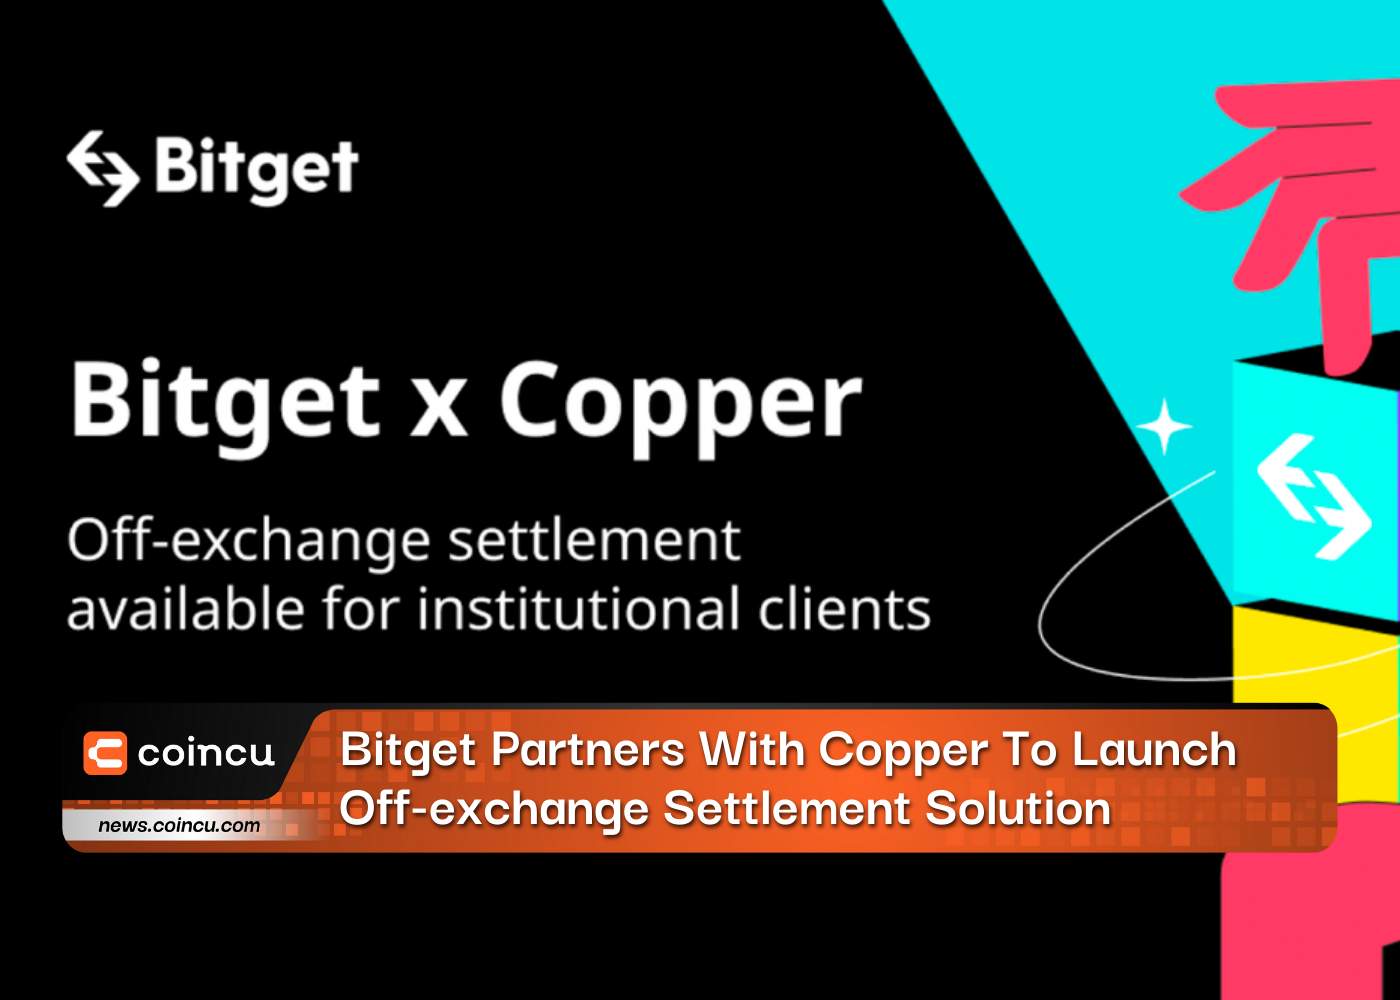 Bitget Partners With Copper To Launch Off-exchange Settlement Solution